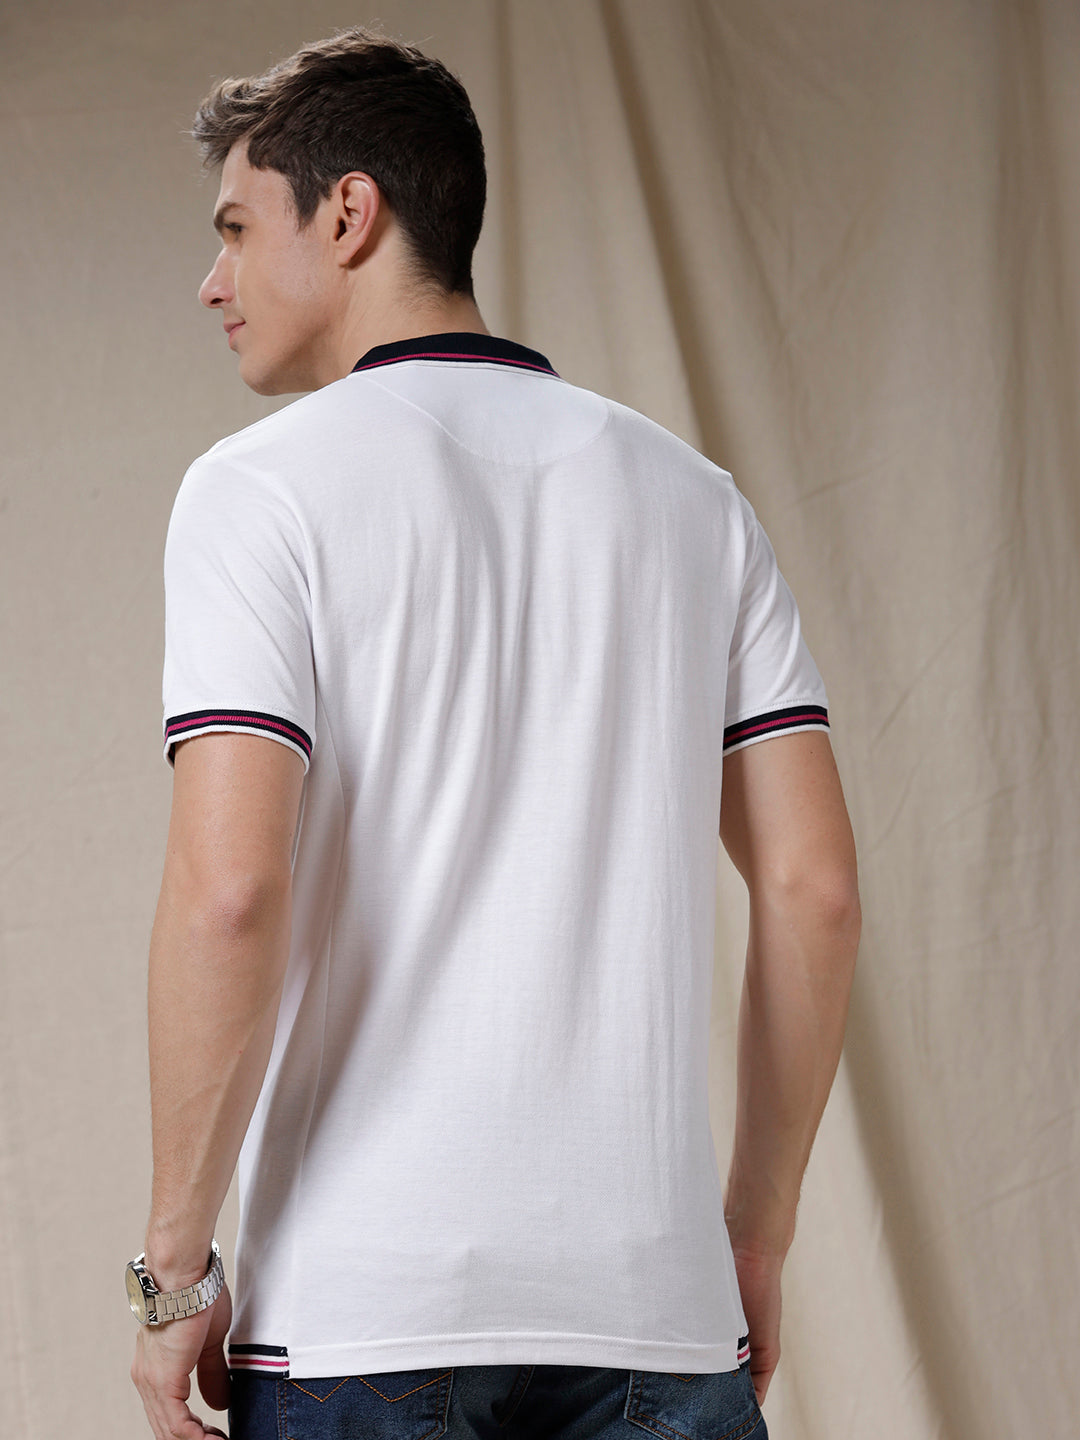 Blocked Edges Solid White Polo T-Shirt